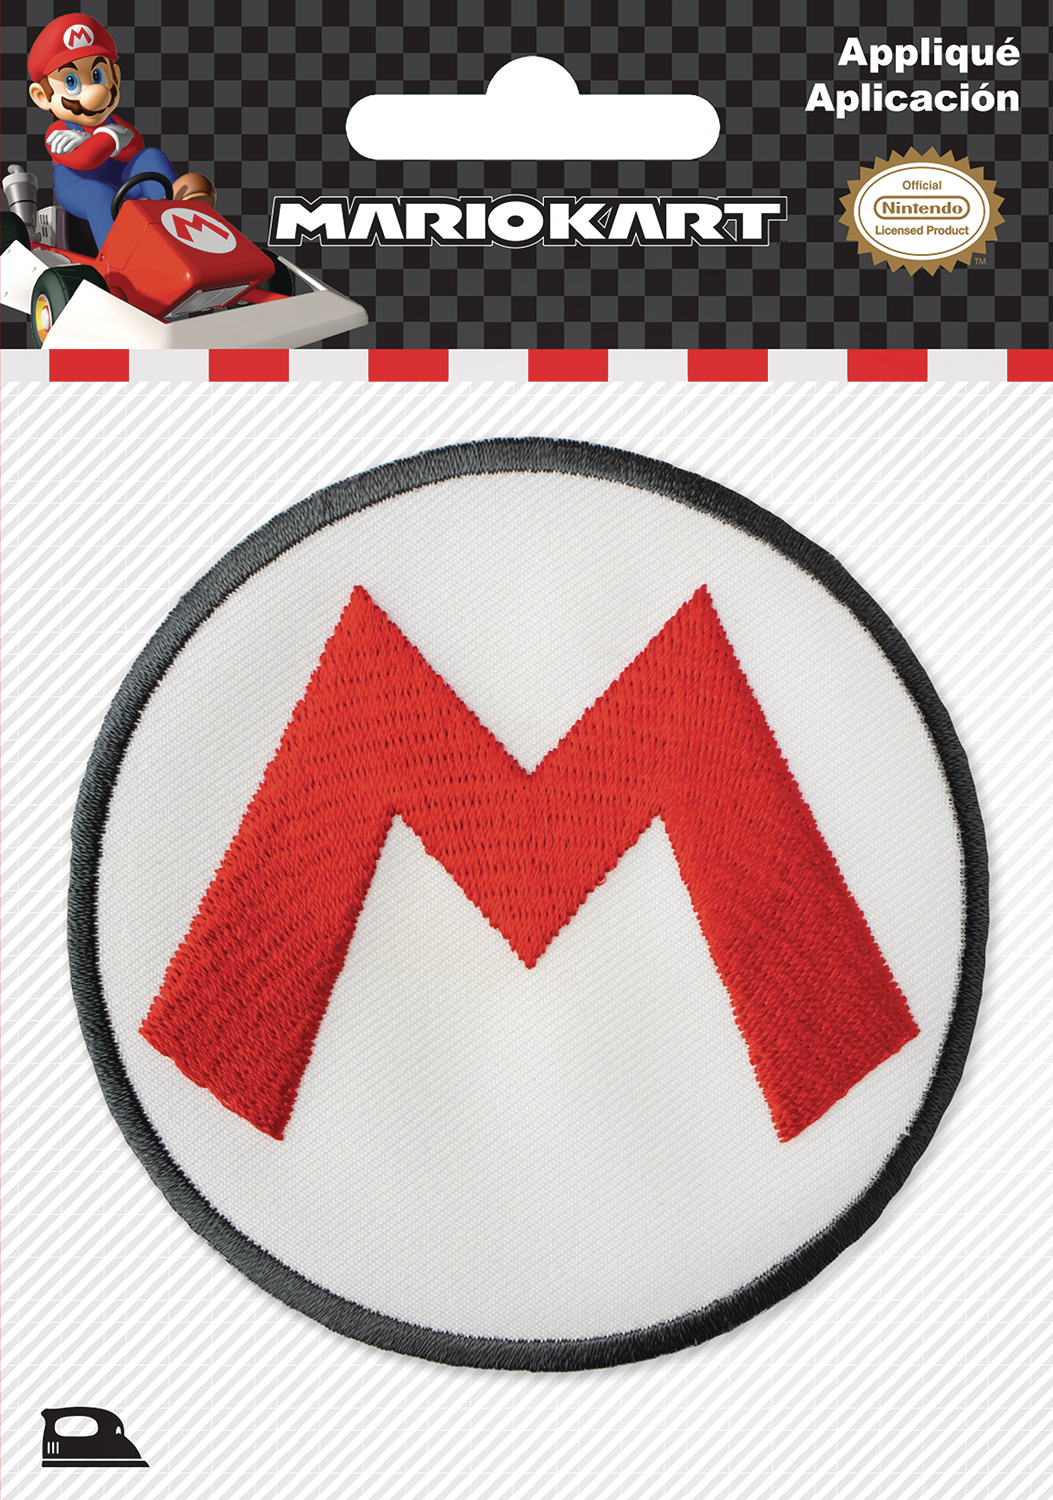 WARIO SUPER MARIO BROTHERS PATCH EMBROIDERED IRON OR SEW ON APPLIQUE GAME BADGE 